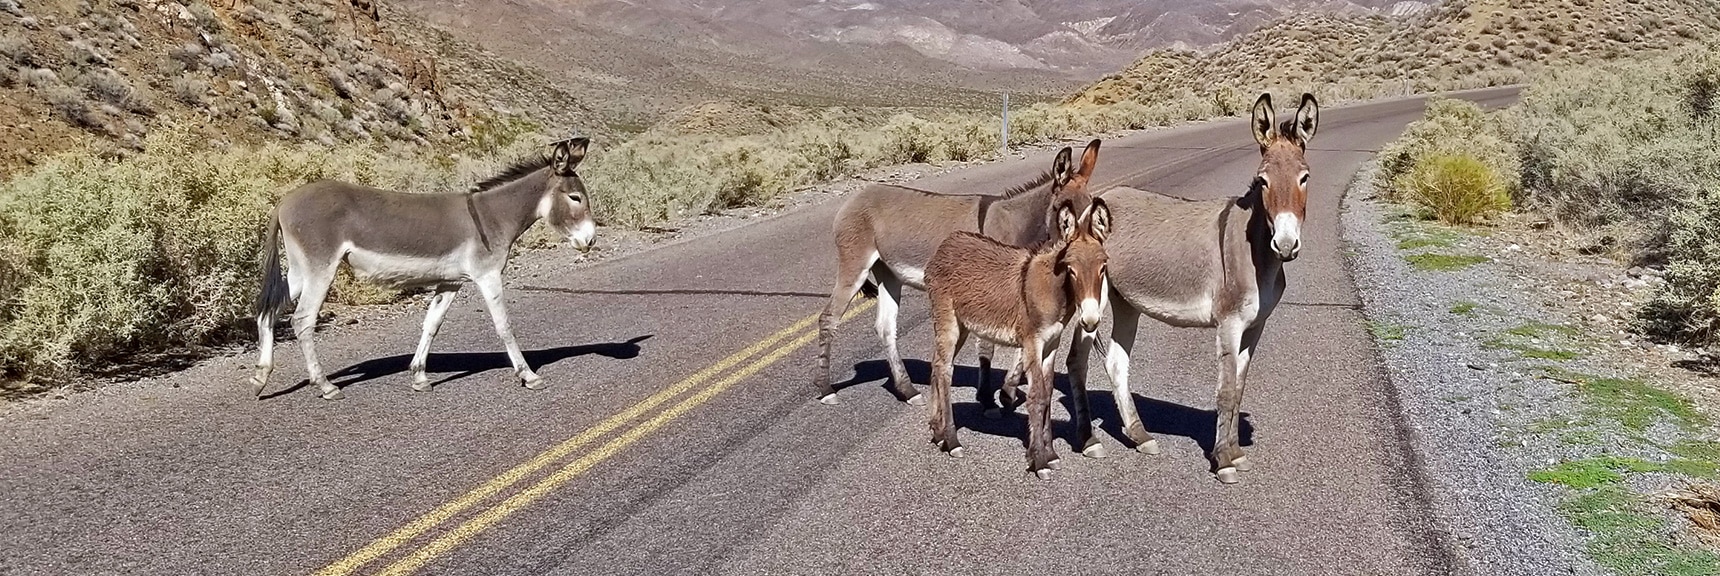 Wild Mule Family on Charcoal Kiln Road | Charcoal Kilns | Death Valley, California